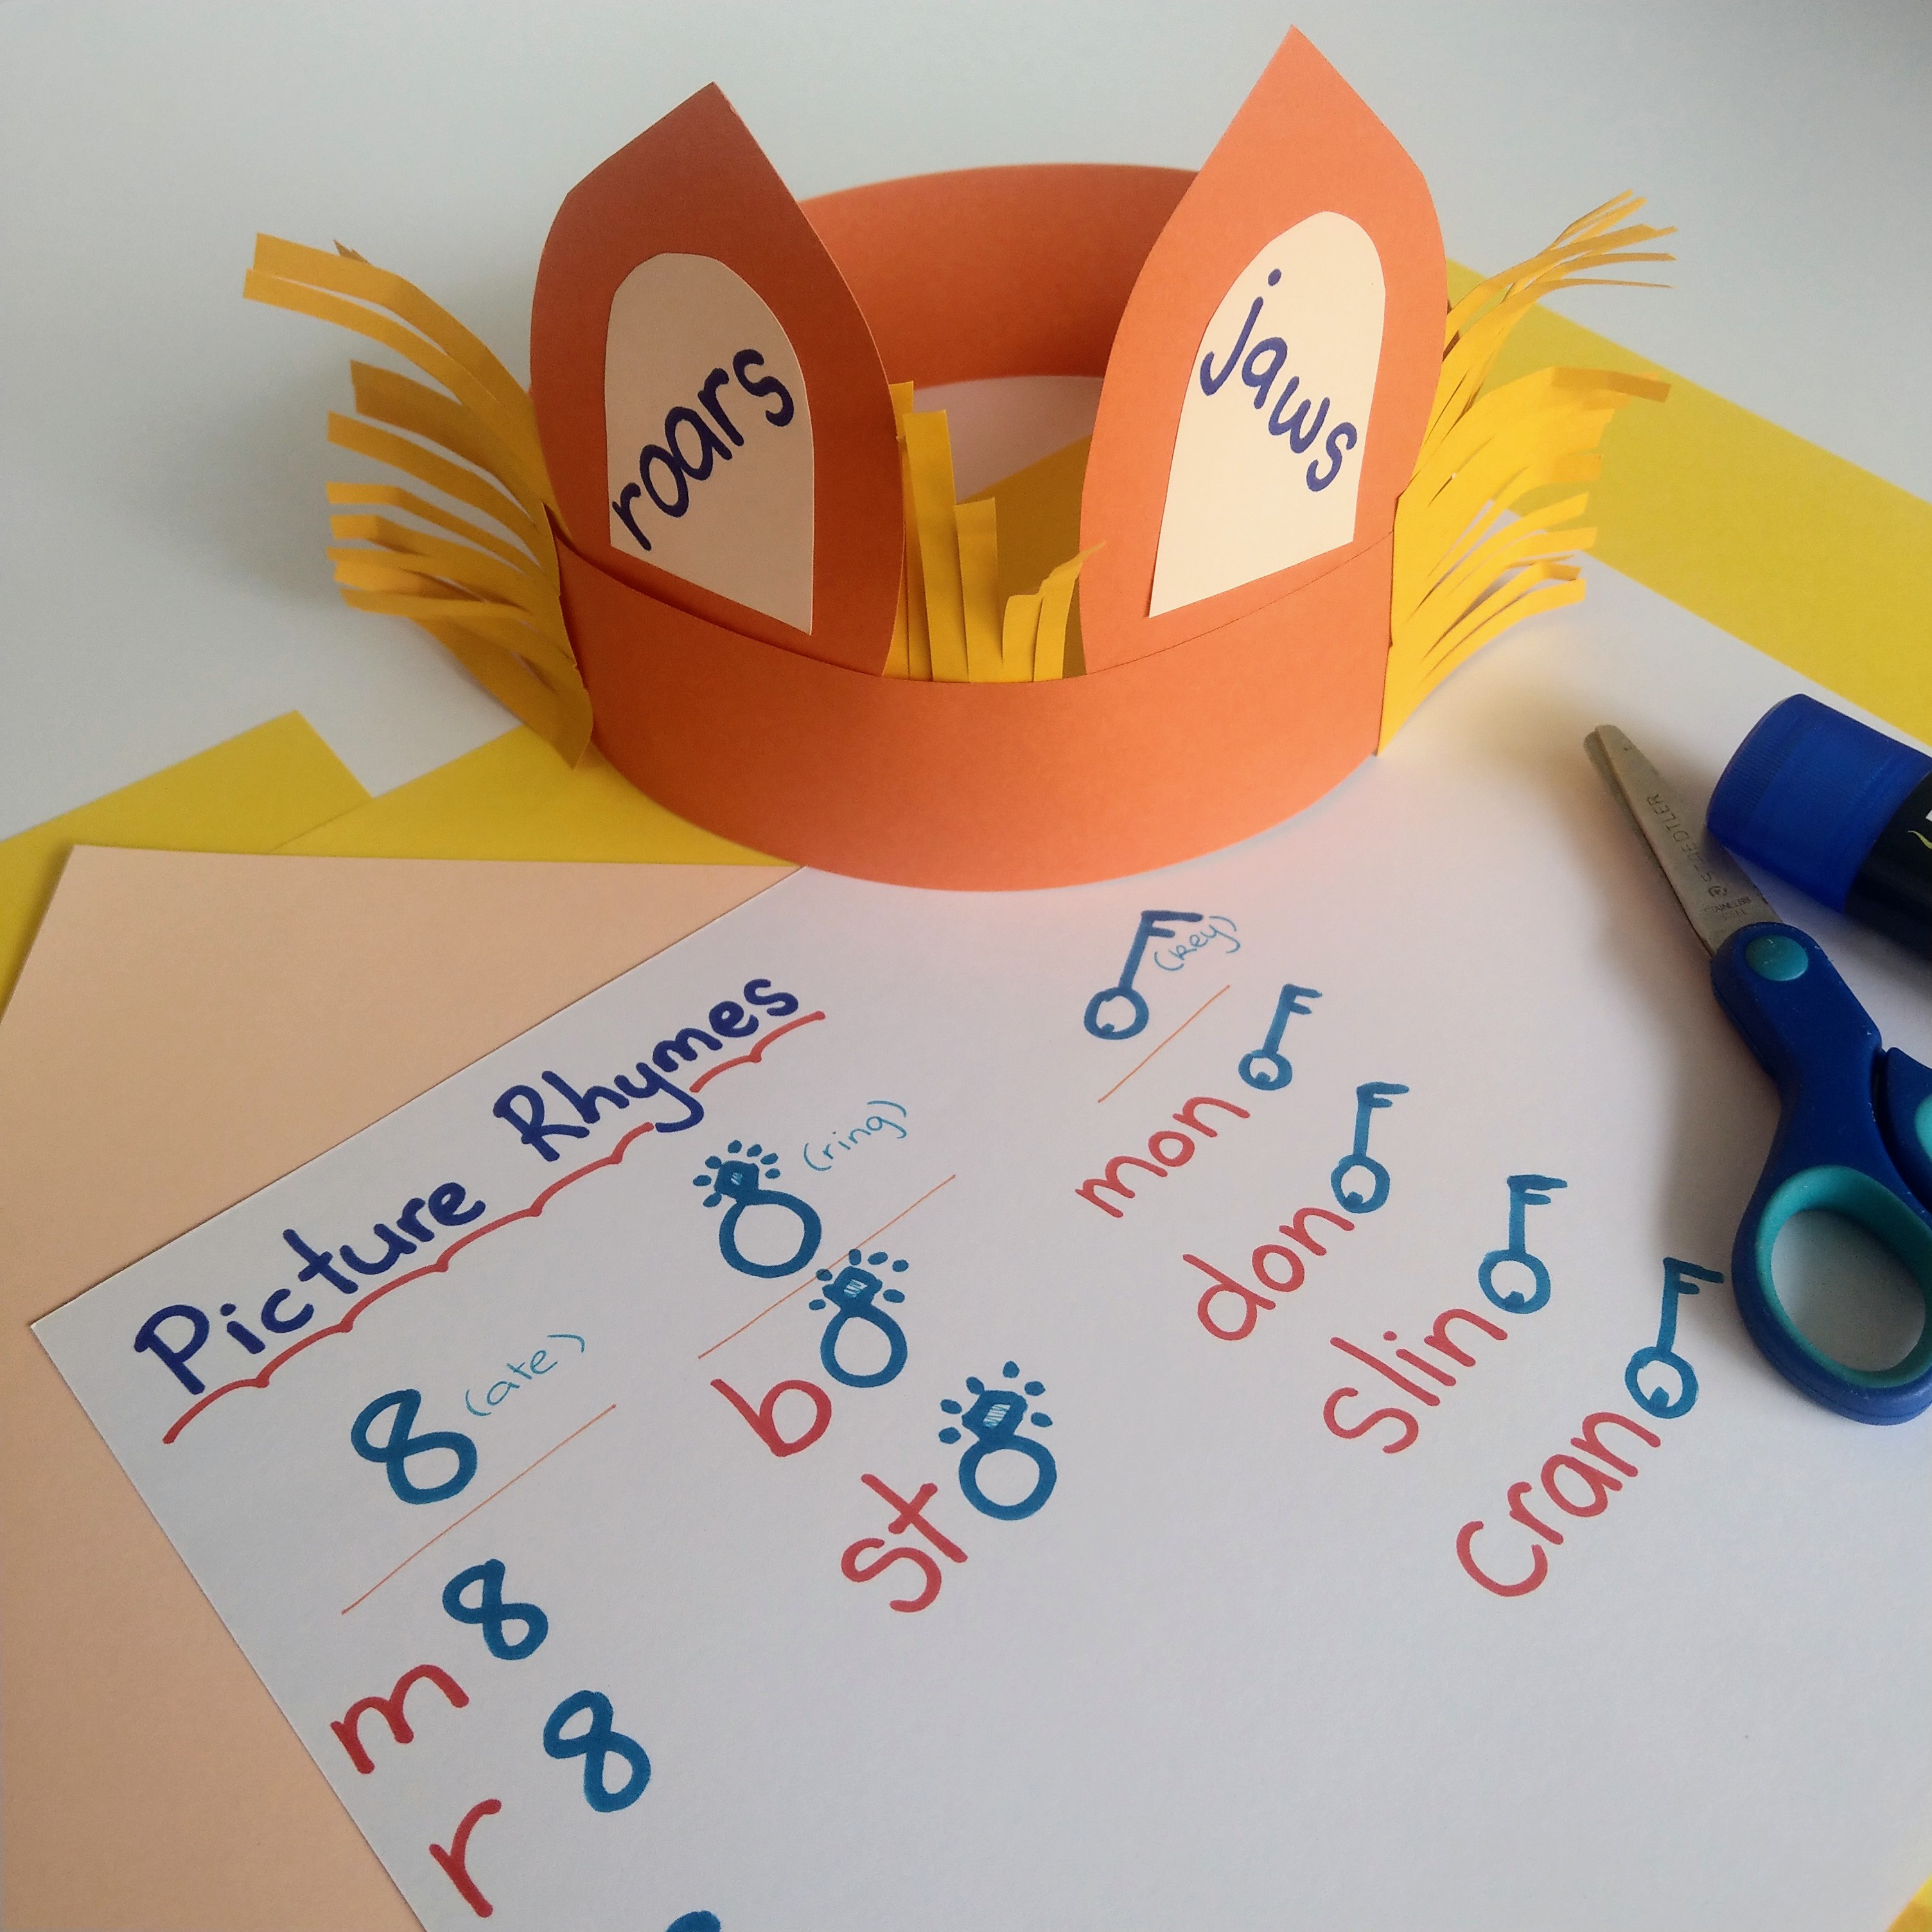 In this fun and creative lessons, students learn to identify rhyming sounds at the ends of words, design and make their own rhyming jungle headband and participate in teams to complete challenges and extend their knowledge.